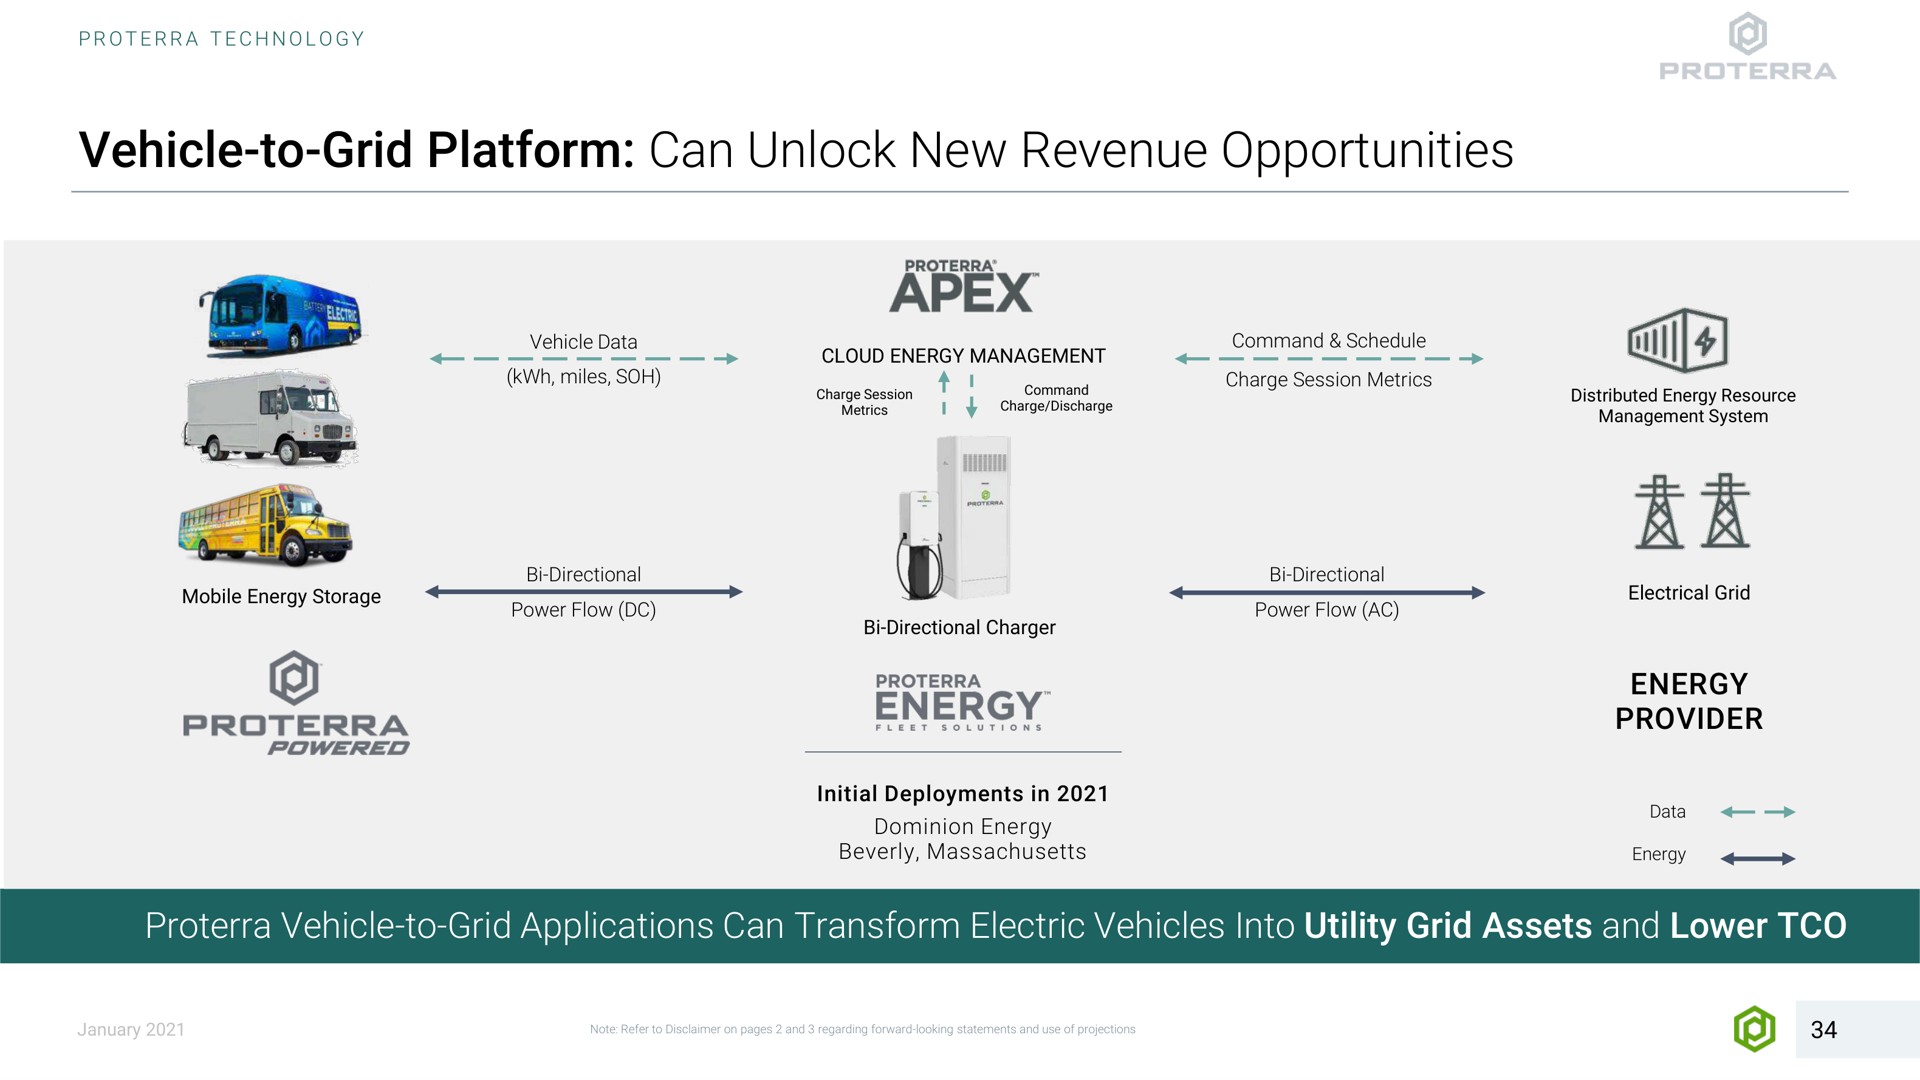 vehicle to grid platform can unlock new revenue opportunities power flow powered initial deployments in power flow energy provider applications transform electric vehicles into utility grid assets and lower dominion energy | Proterra